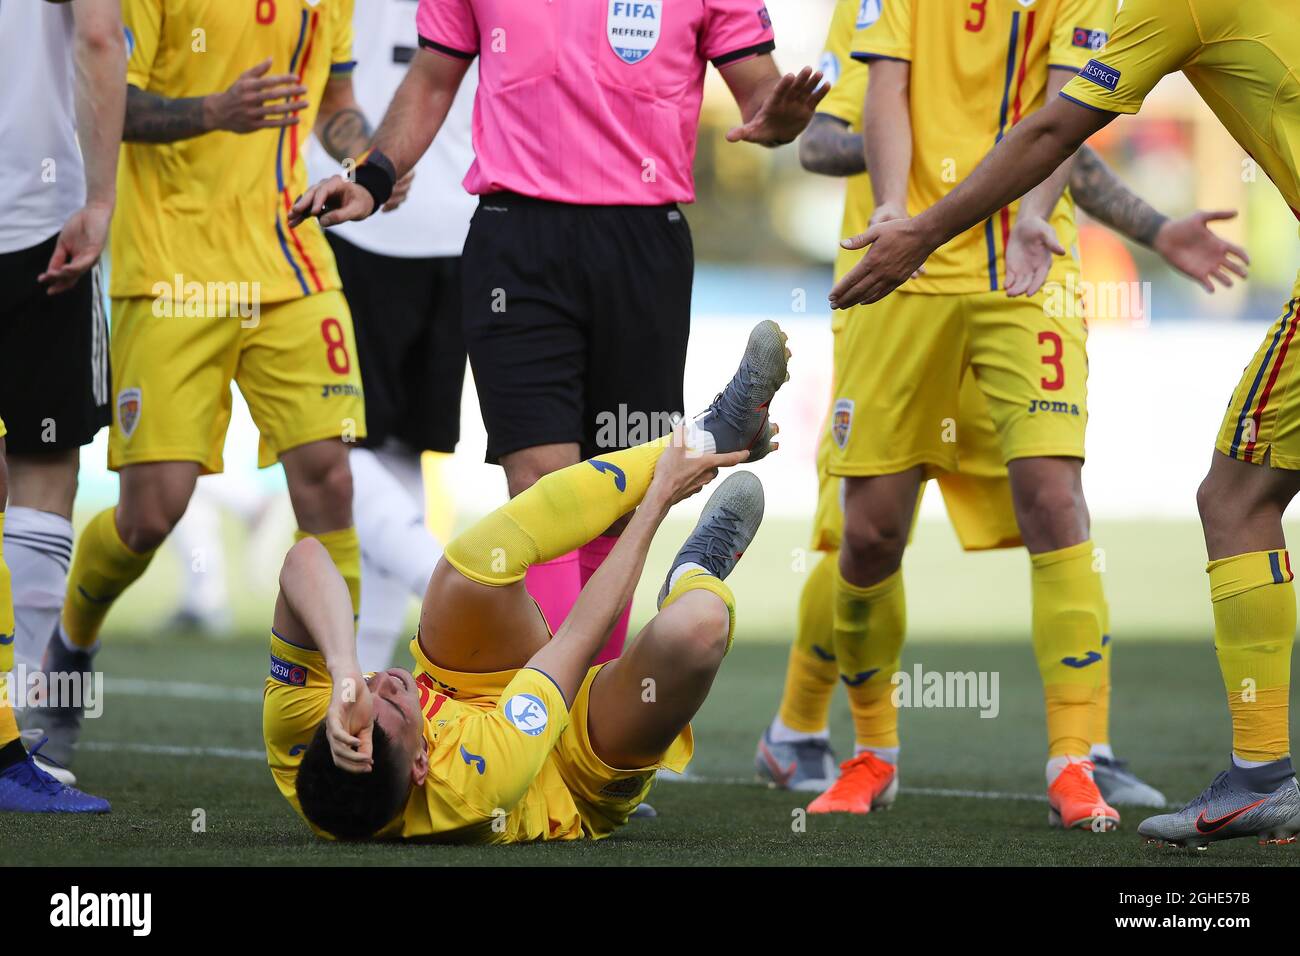 Ianis HagiÊof Romania rolls around in the penalty area after being fouled by Timo Baumgartl of Germany by stepping on his ankle to concede a penalty during the UEFA Under-21 Championship match at Renato Dall'Ara, Bologna. Picture date: 27th June 2019. Picture credit should read: Jonathan Moscrop/Sportimage via PA Images Stock Photo